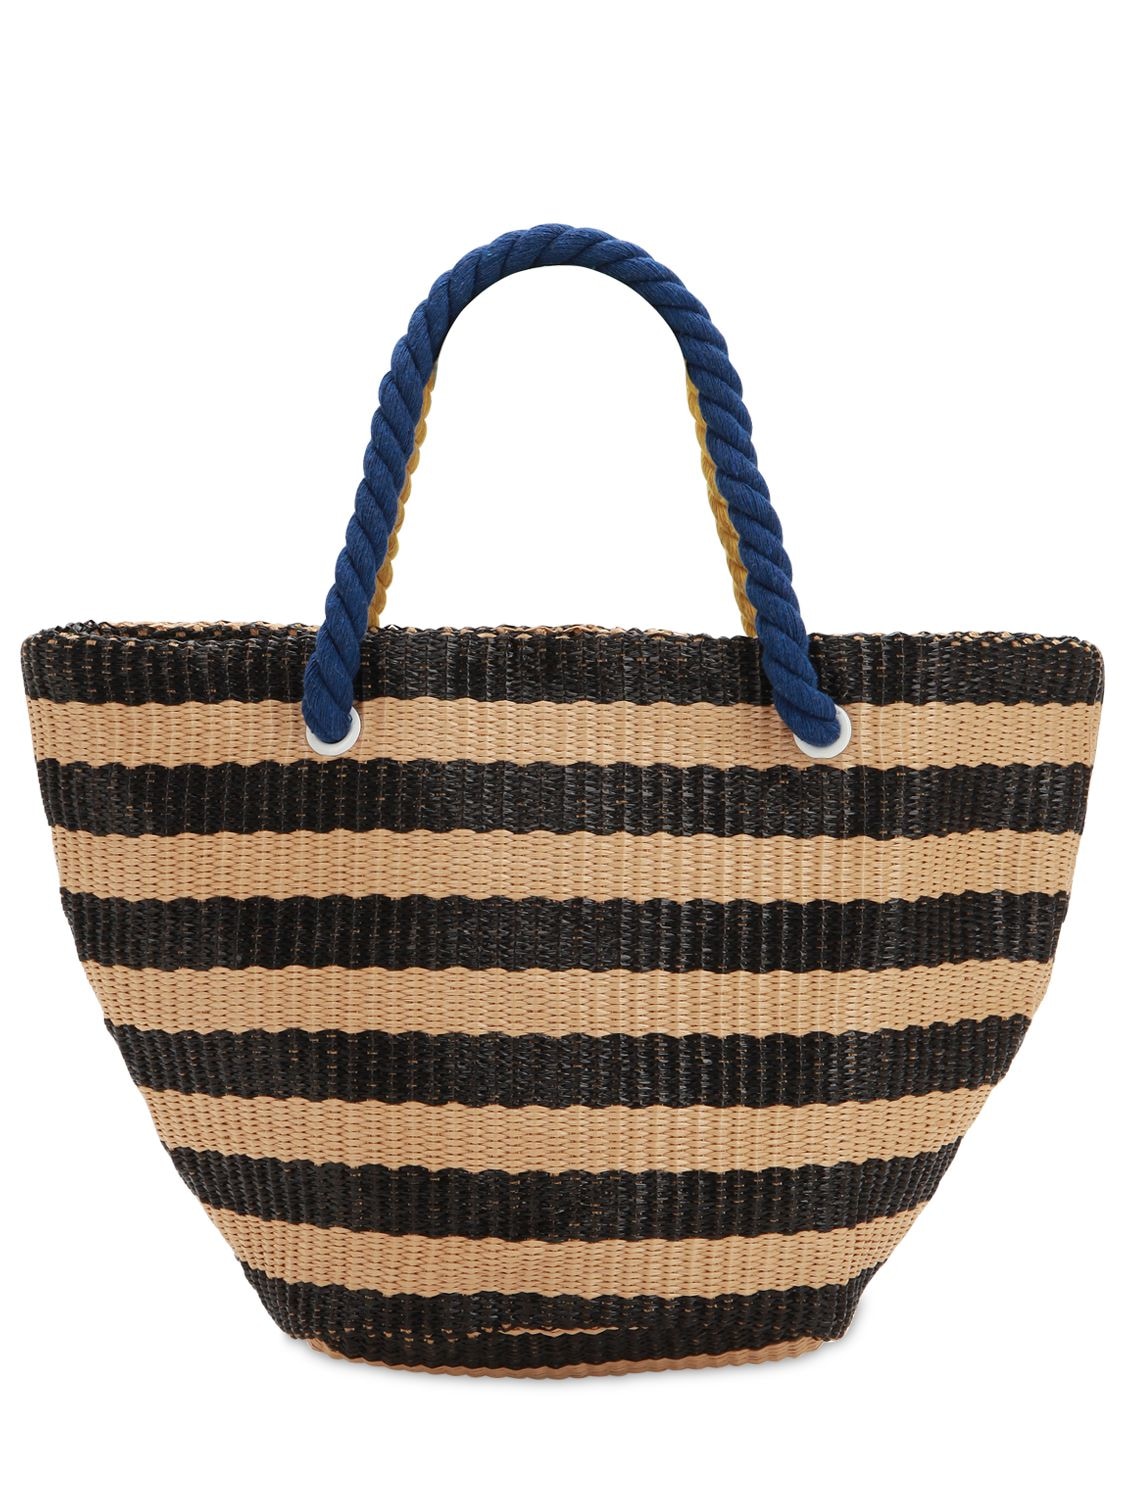 ONCEStriped Woven Tote Bag | DailyMail